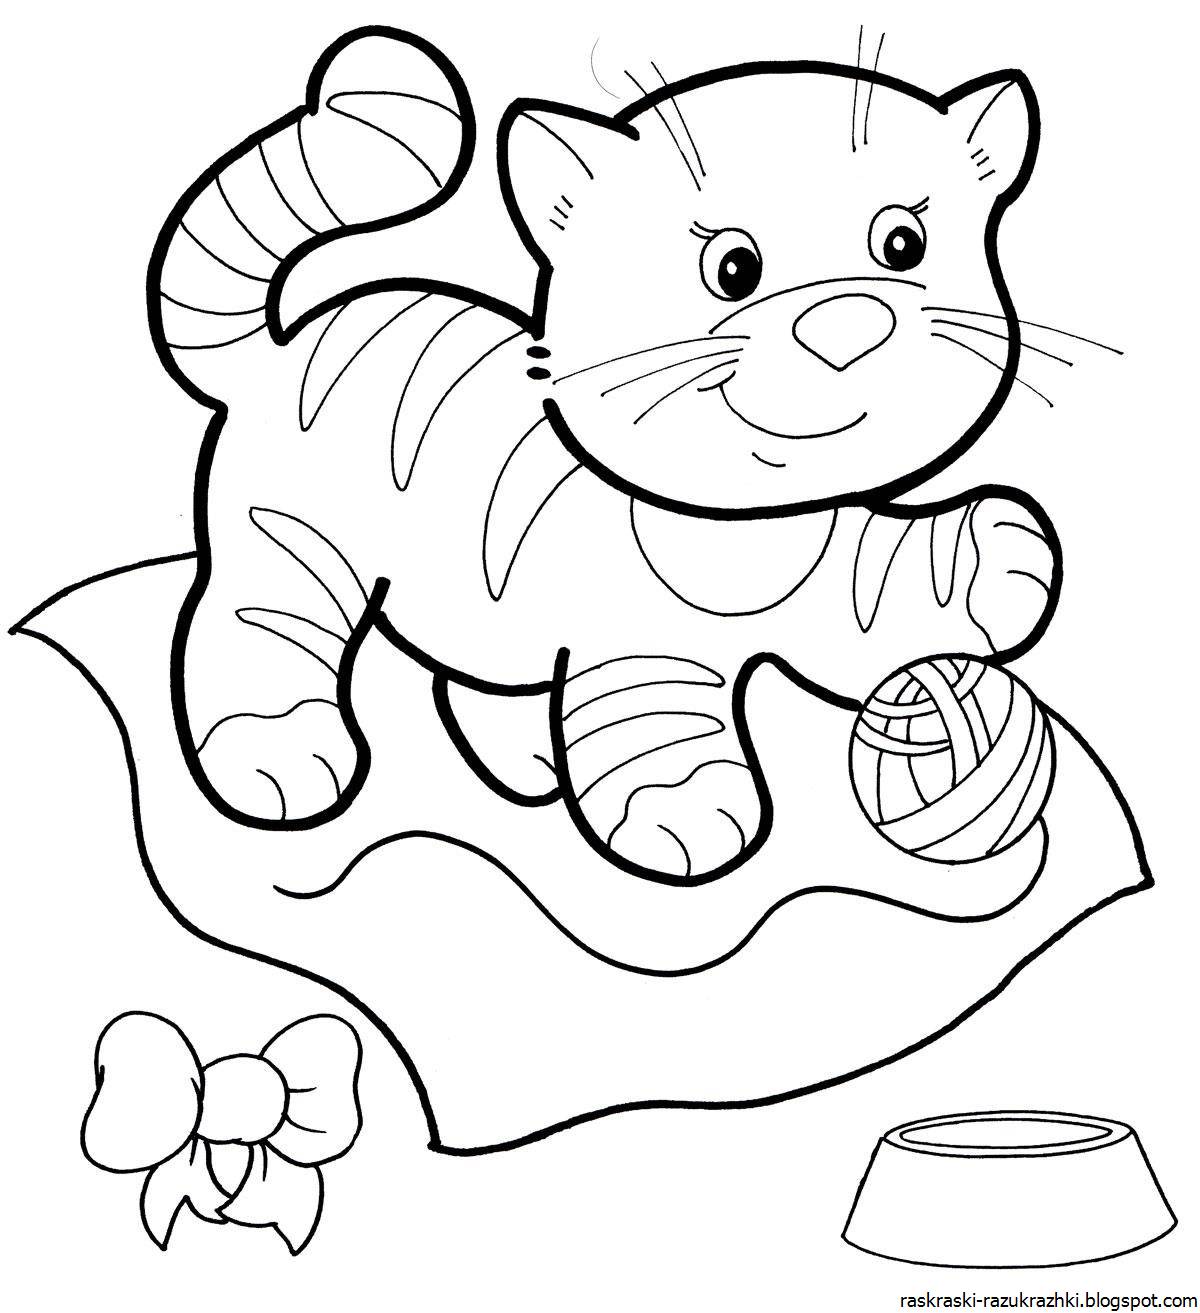 Coloring book funny cat for kids